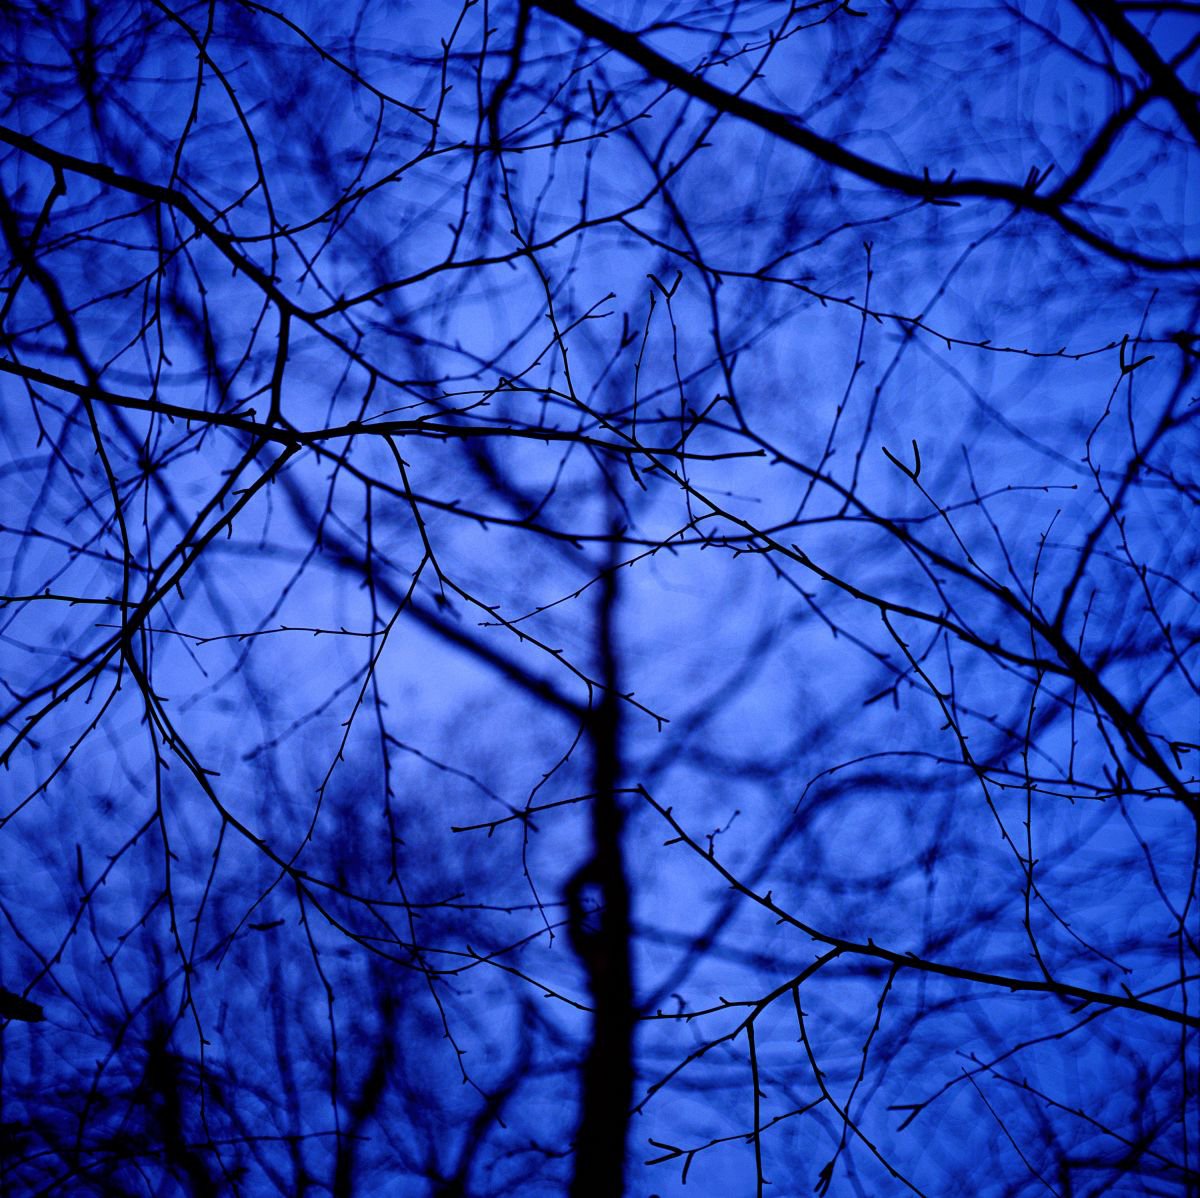 Blue Tree #2 by James Cooper Images